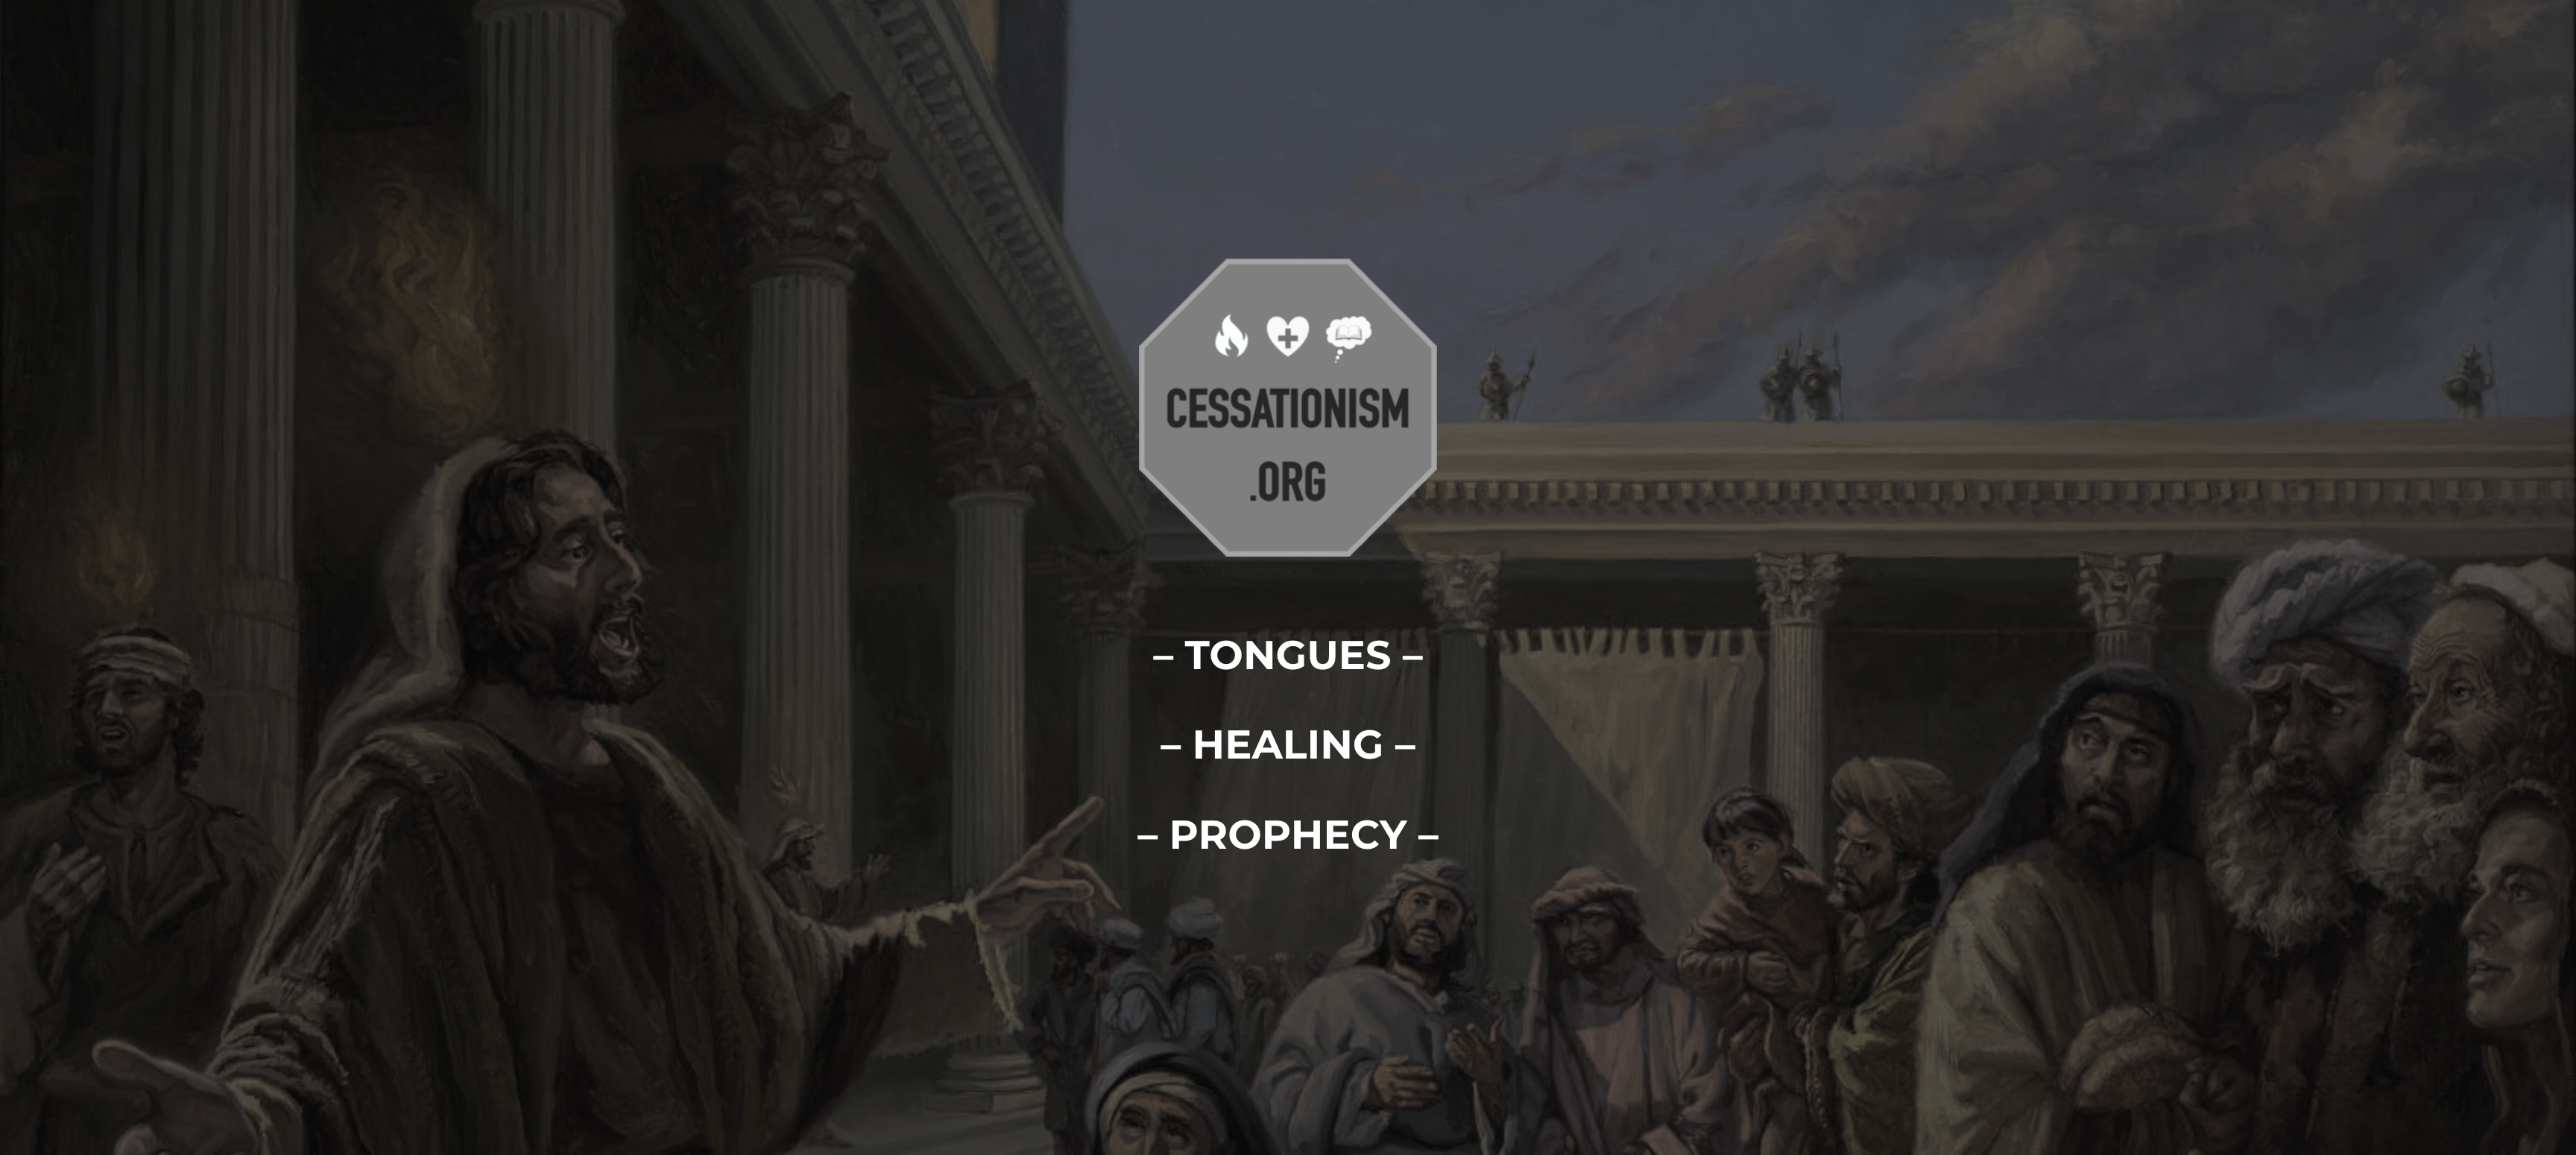 Welcome to the Cessationism.org Blog!